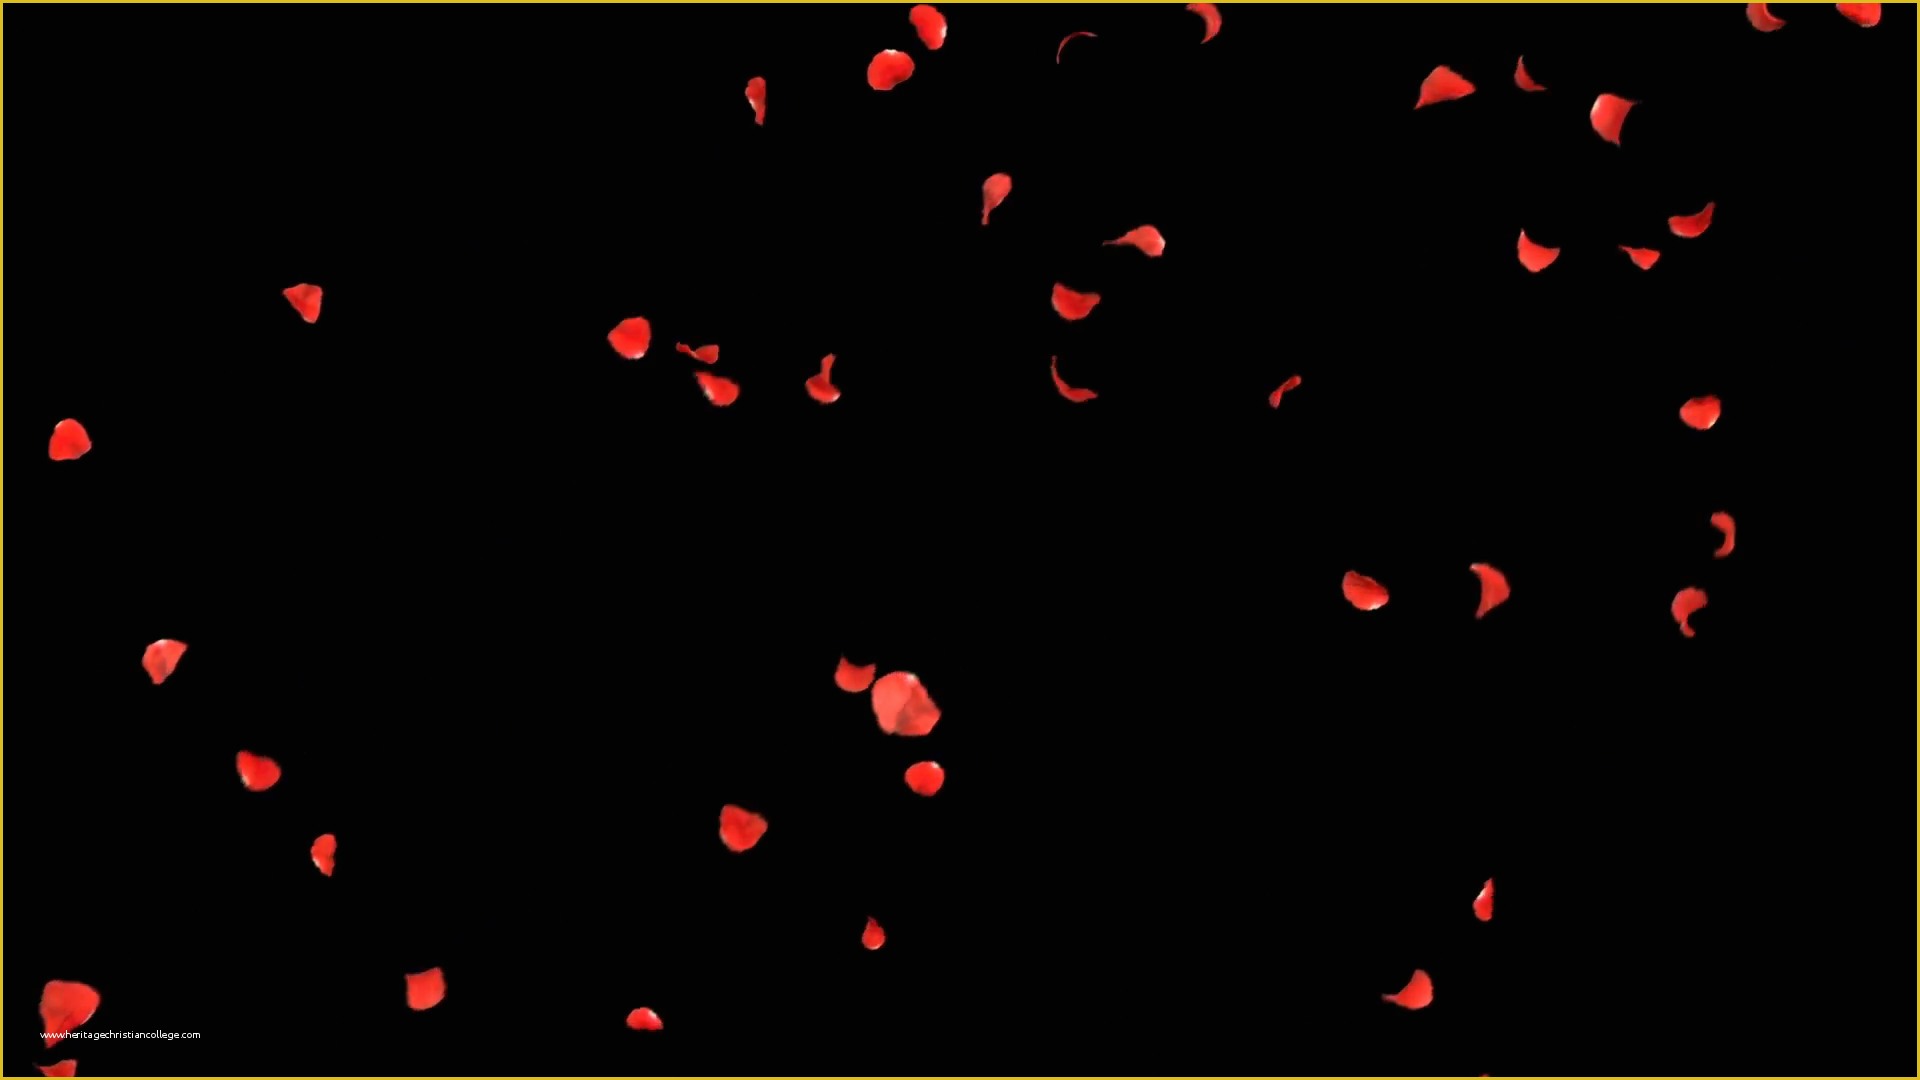 Falling Flower Petals after Effects Template Free Of Falling Petals Roses 3d Animation On White and Black